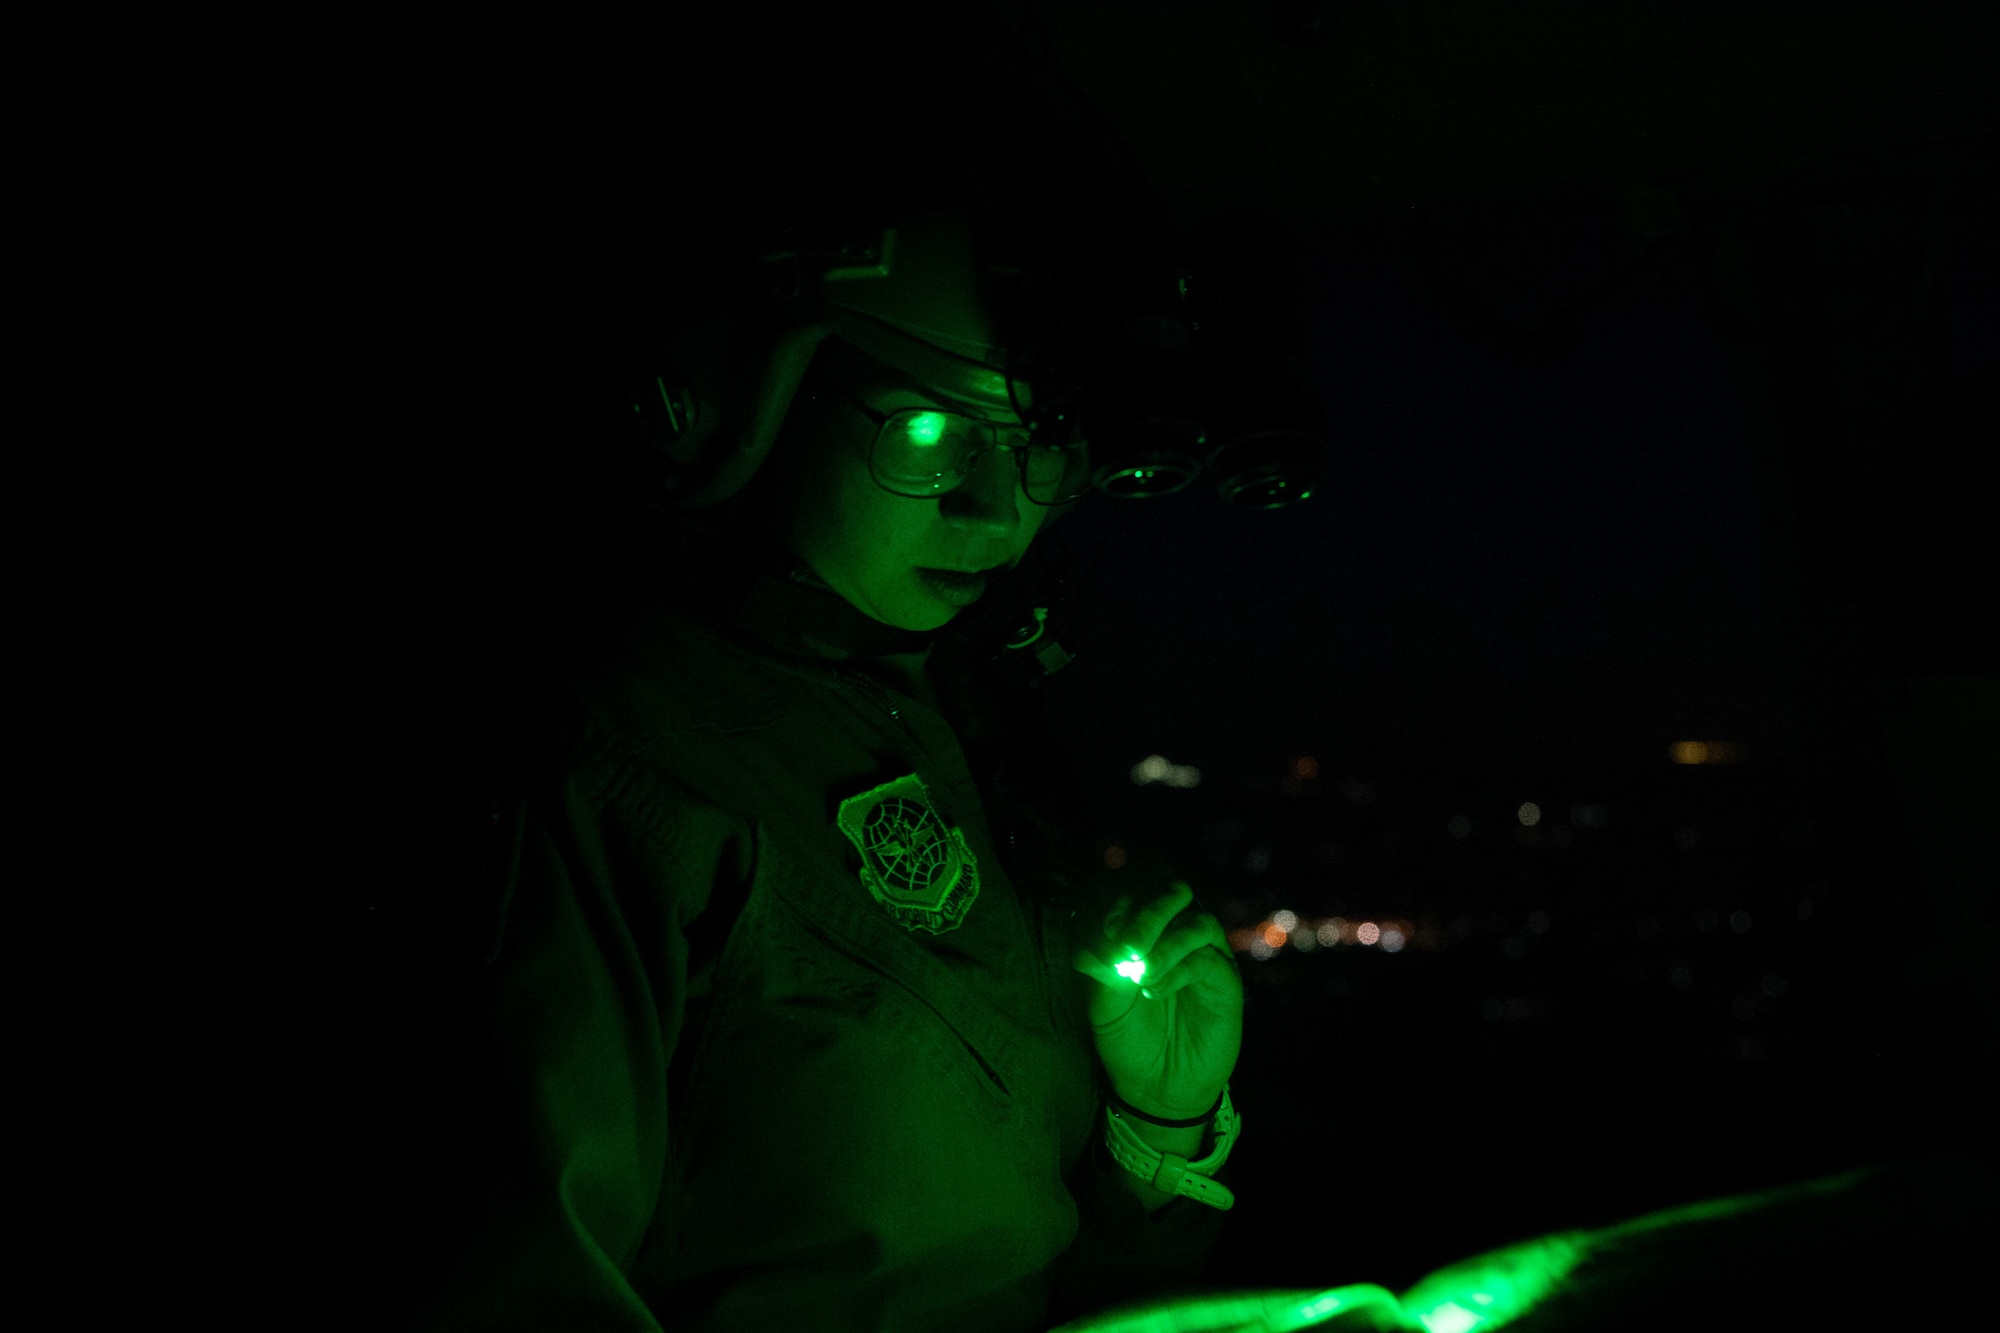 Capt. Sarah Aravich, 3rd Airlift Squadron pilot, reads a map during a training sortie on a C-17 Globemaster III over Pennsylvania, Jan. 28, 2021. In combat, flying at night without artificial light minimizes visibility of the aircraft and reduces threat from potential enemies. The 3rd AS routinely trains to support global engagement through direct delivery of time-critical theater deployment assets and ensure aircrew operational readiness. (U.S. Air Force photo by Airman 1st Class Faith Schaefer)